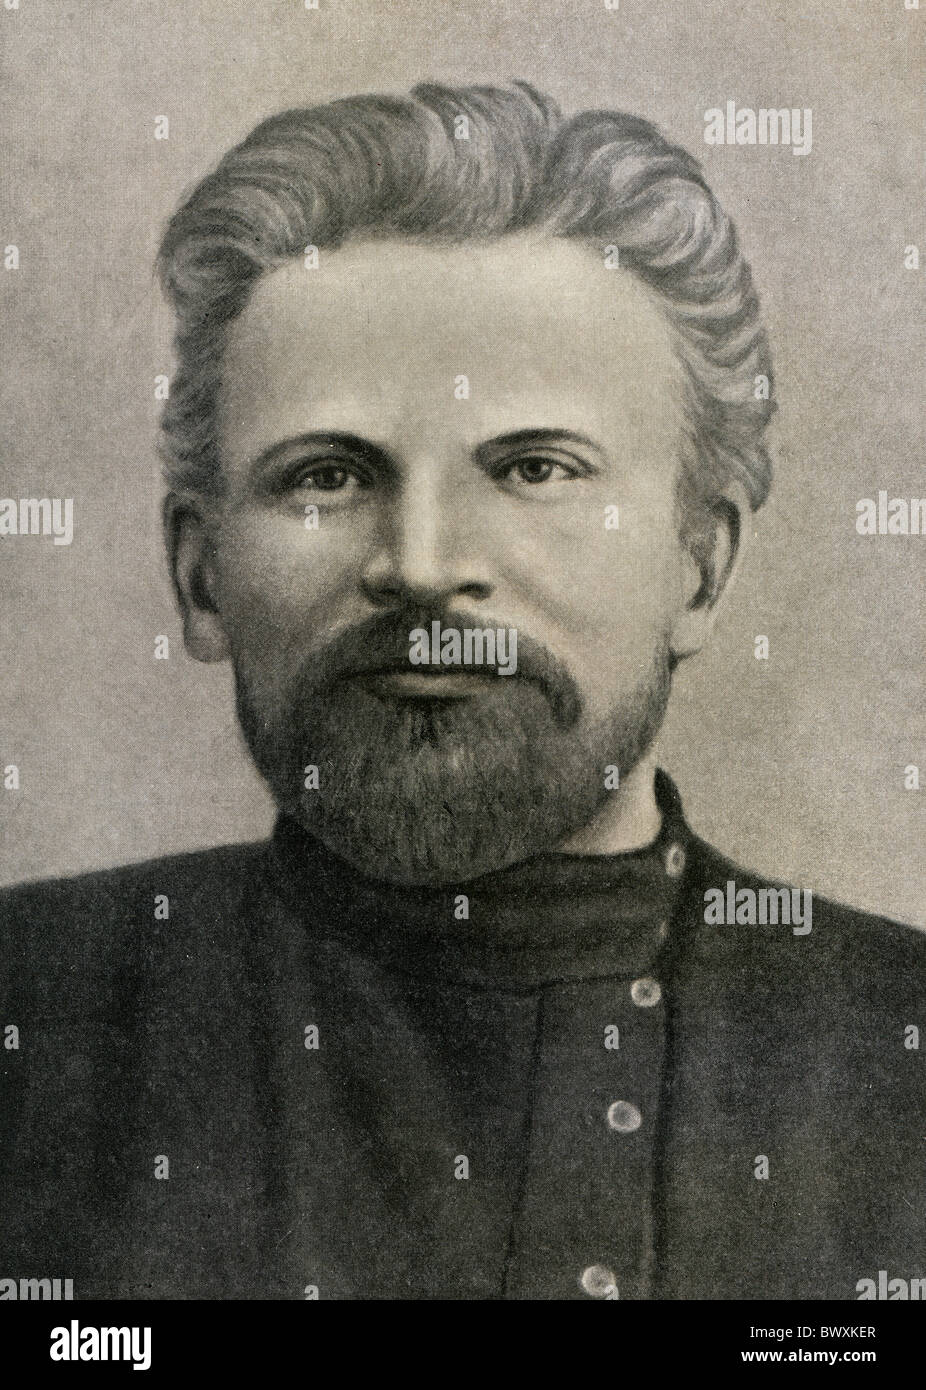 Mikhail Kalinin, 1910. Photo from the collection of State Museum of Revolution, the Soviet Union. Stock Photo